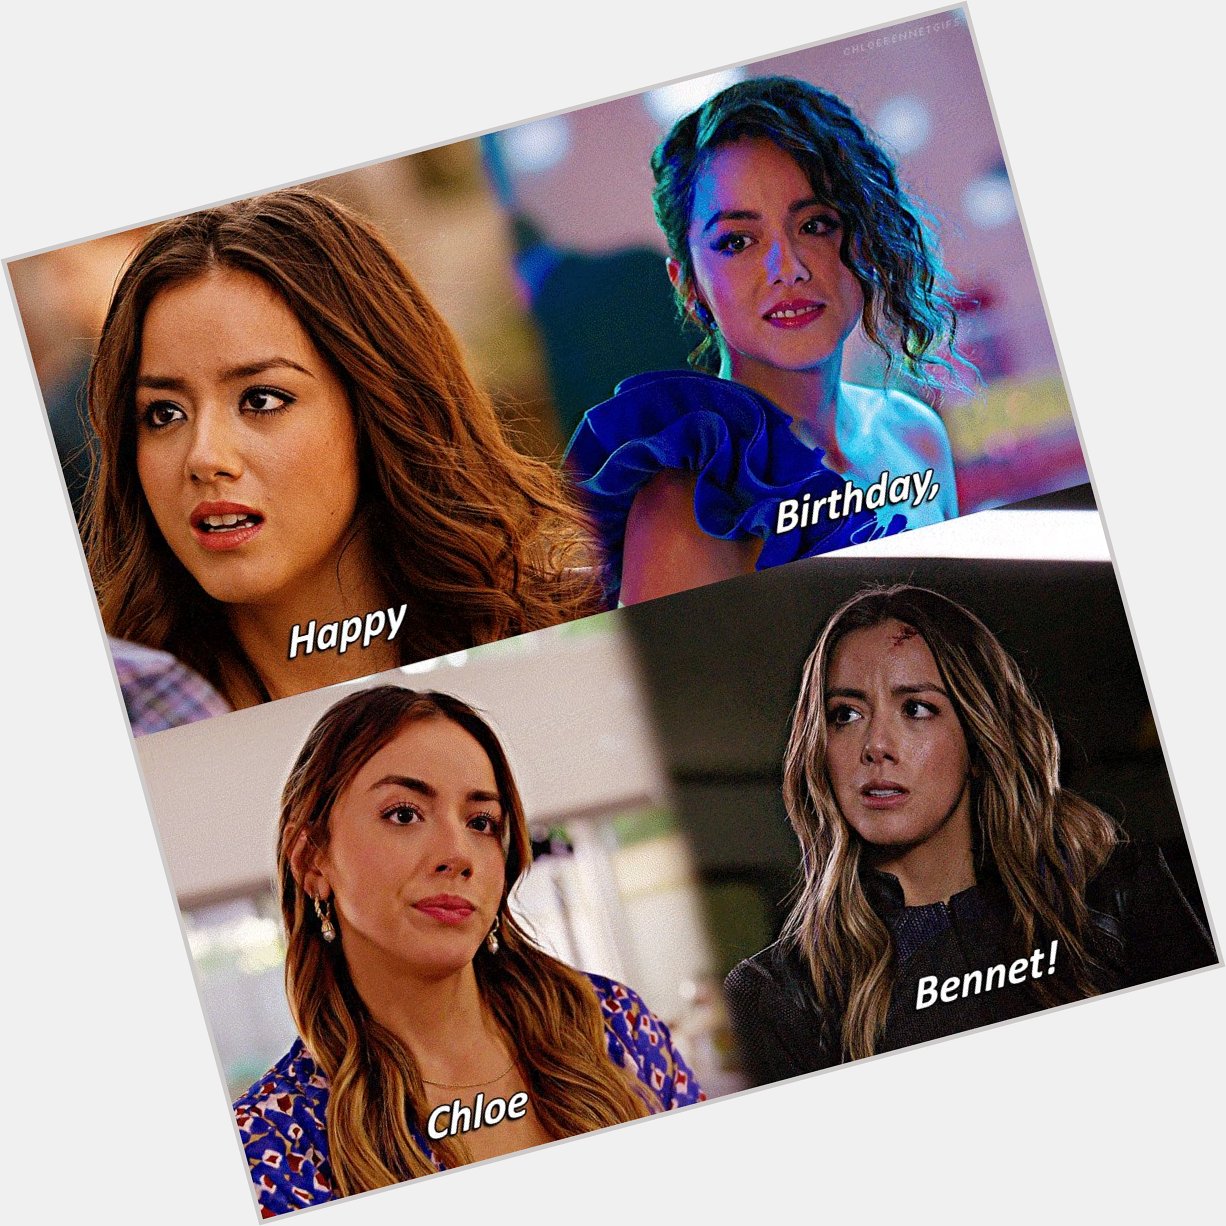 The beautiful and talented Chloe Bennet turns 31 today! Happy birthday, 